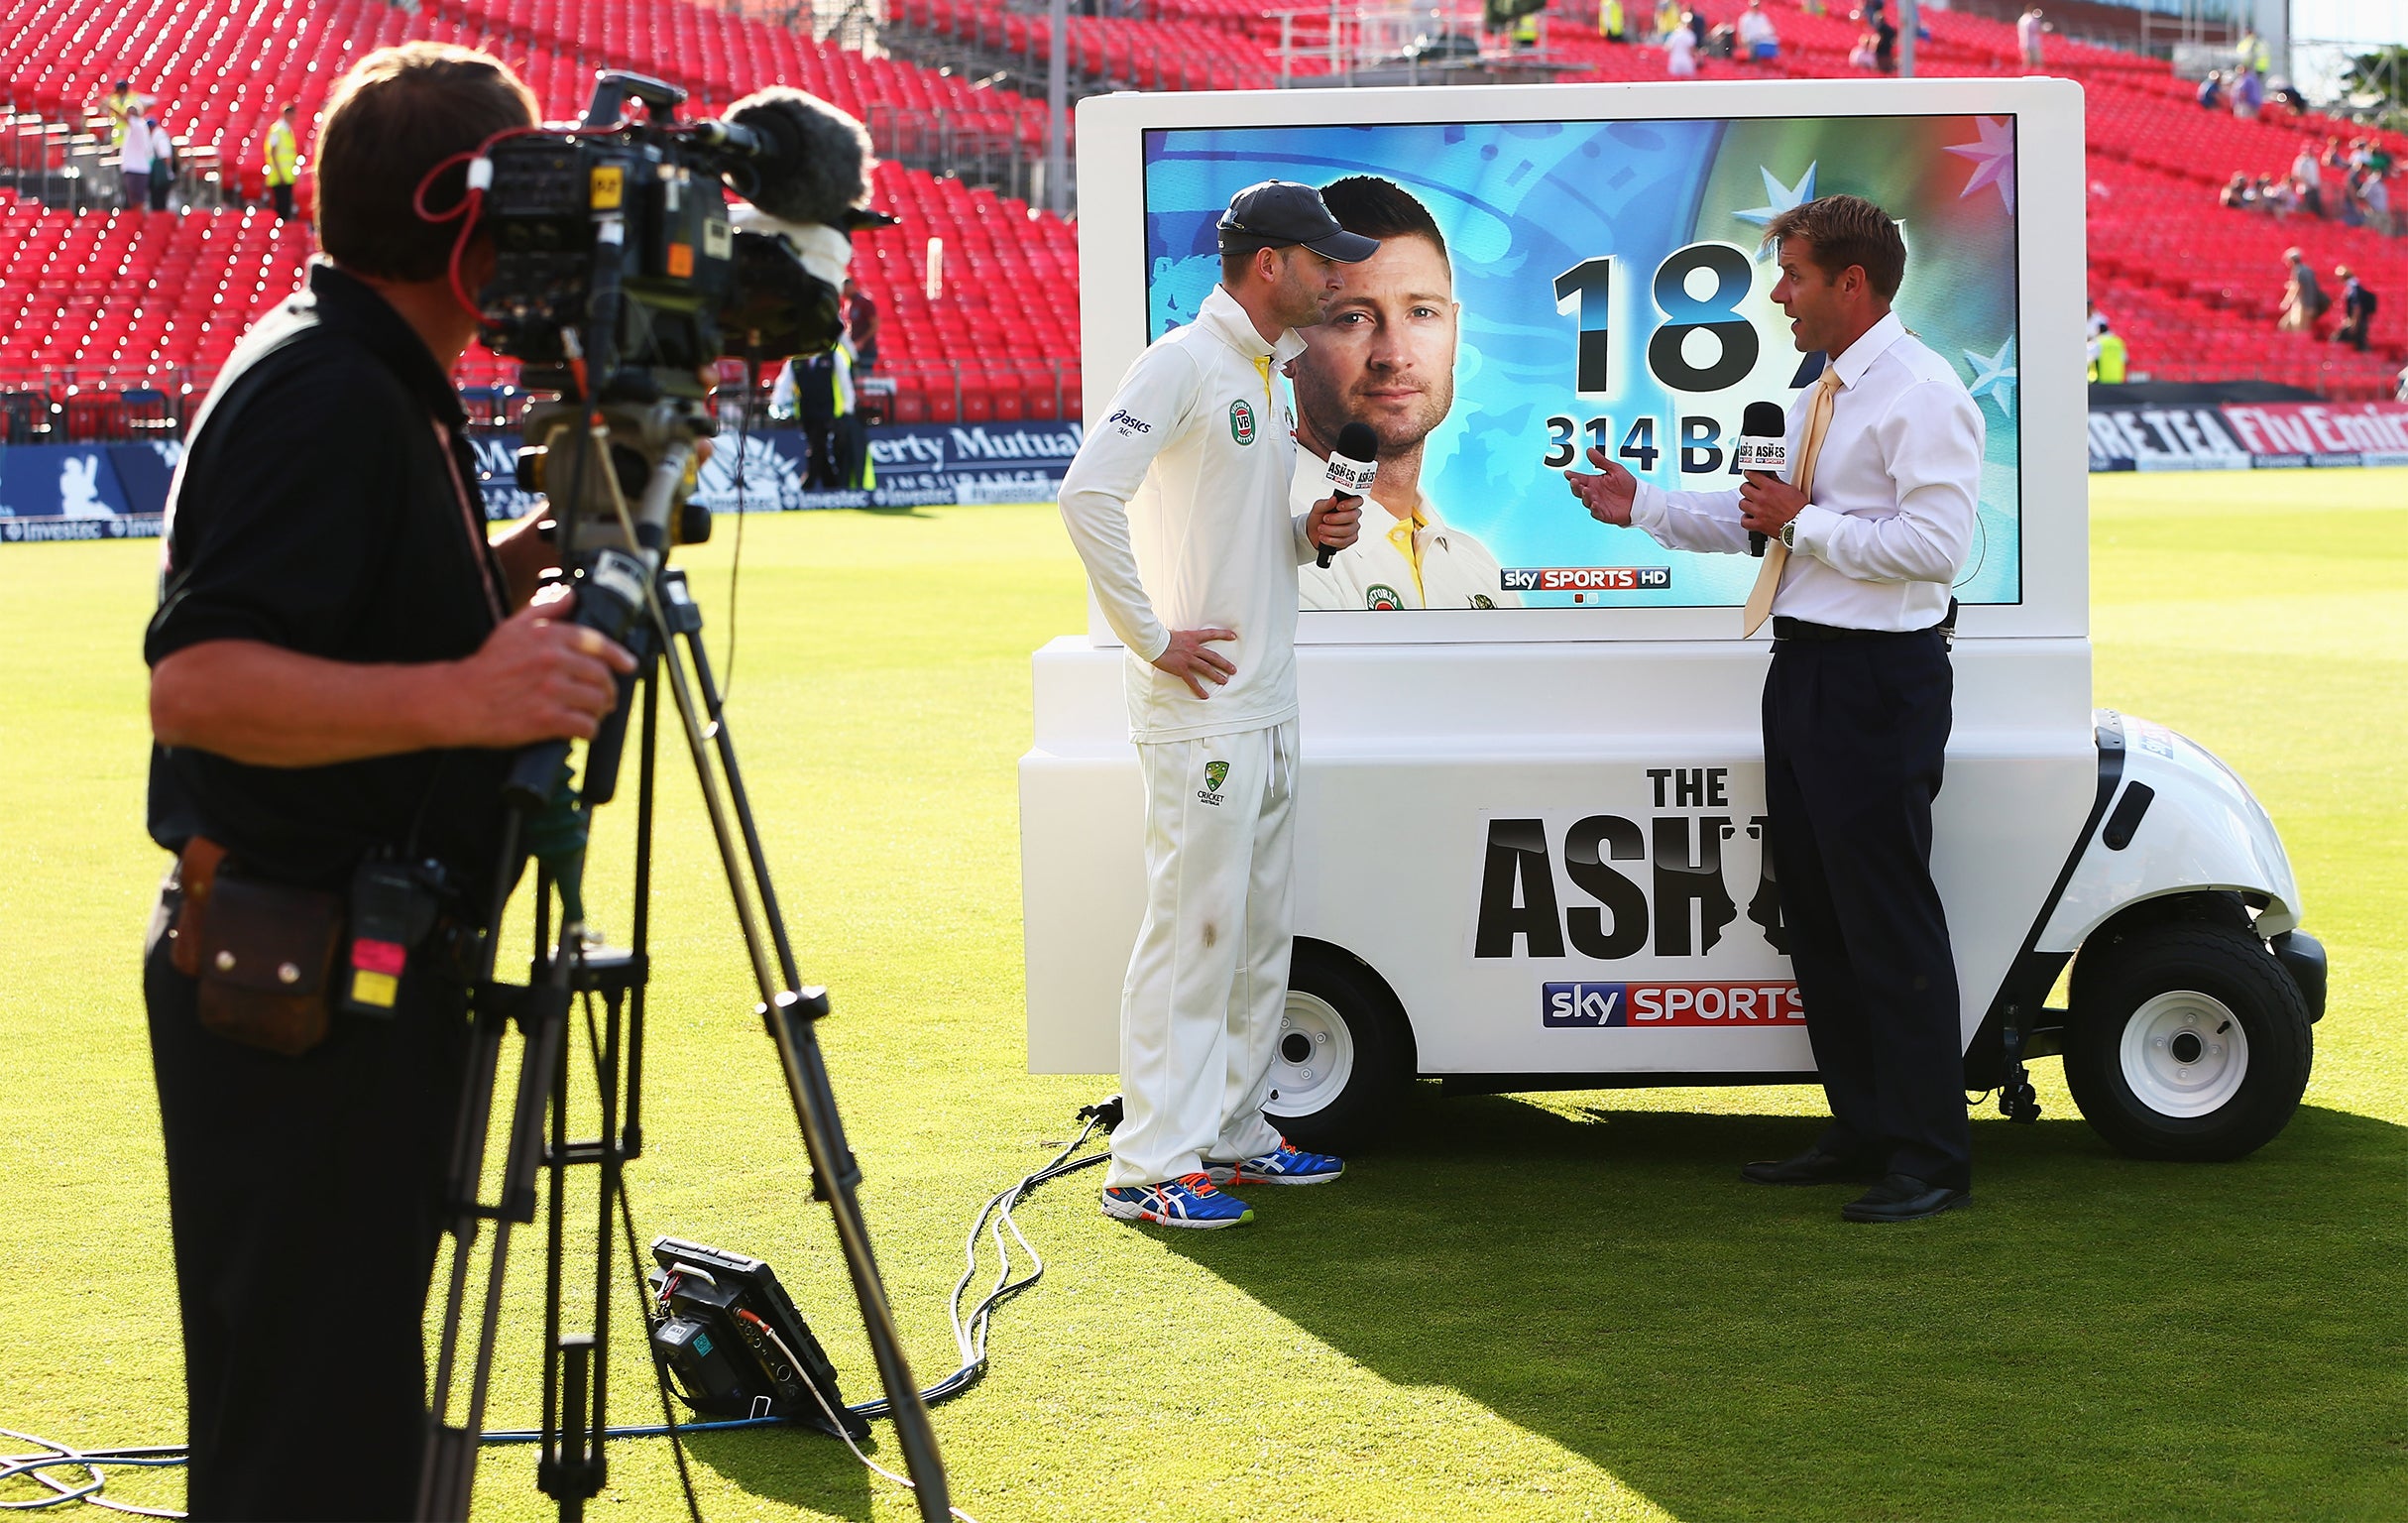 Ian Ward mans the innovative Sky cart while talking to Australia’s captain, Michael Clarke, during the Ashes series last summer